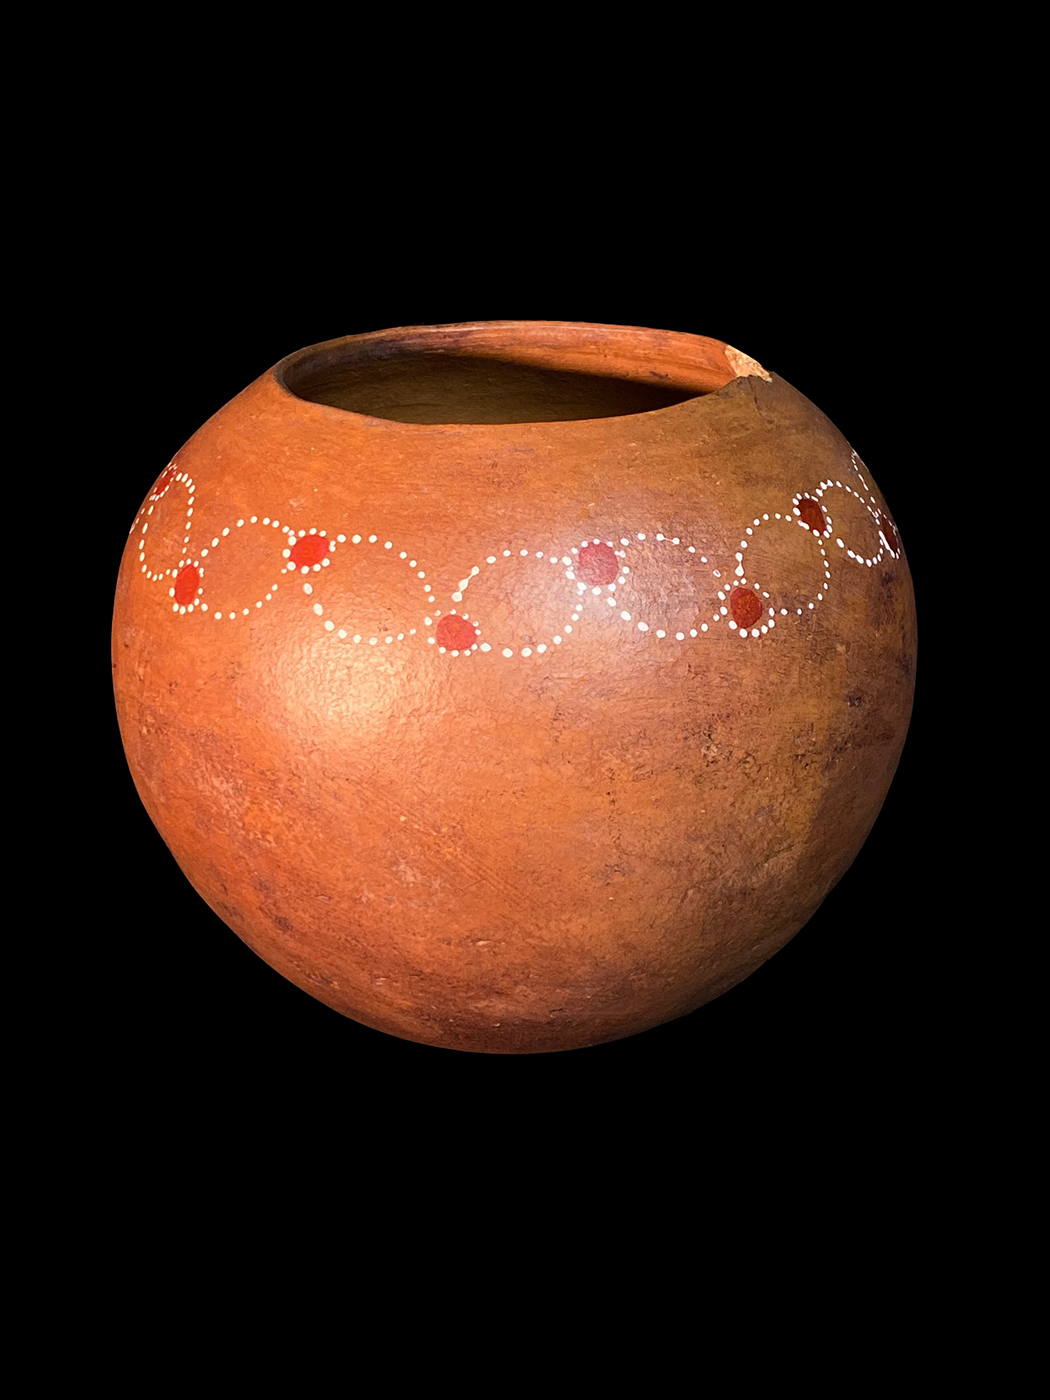 Clay Beer Pot - Zulu People, South Africa